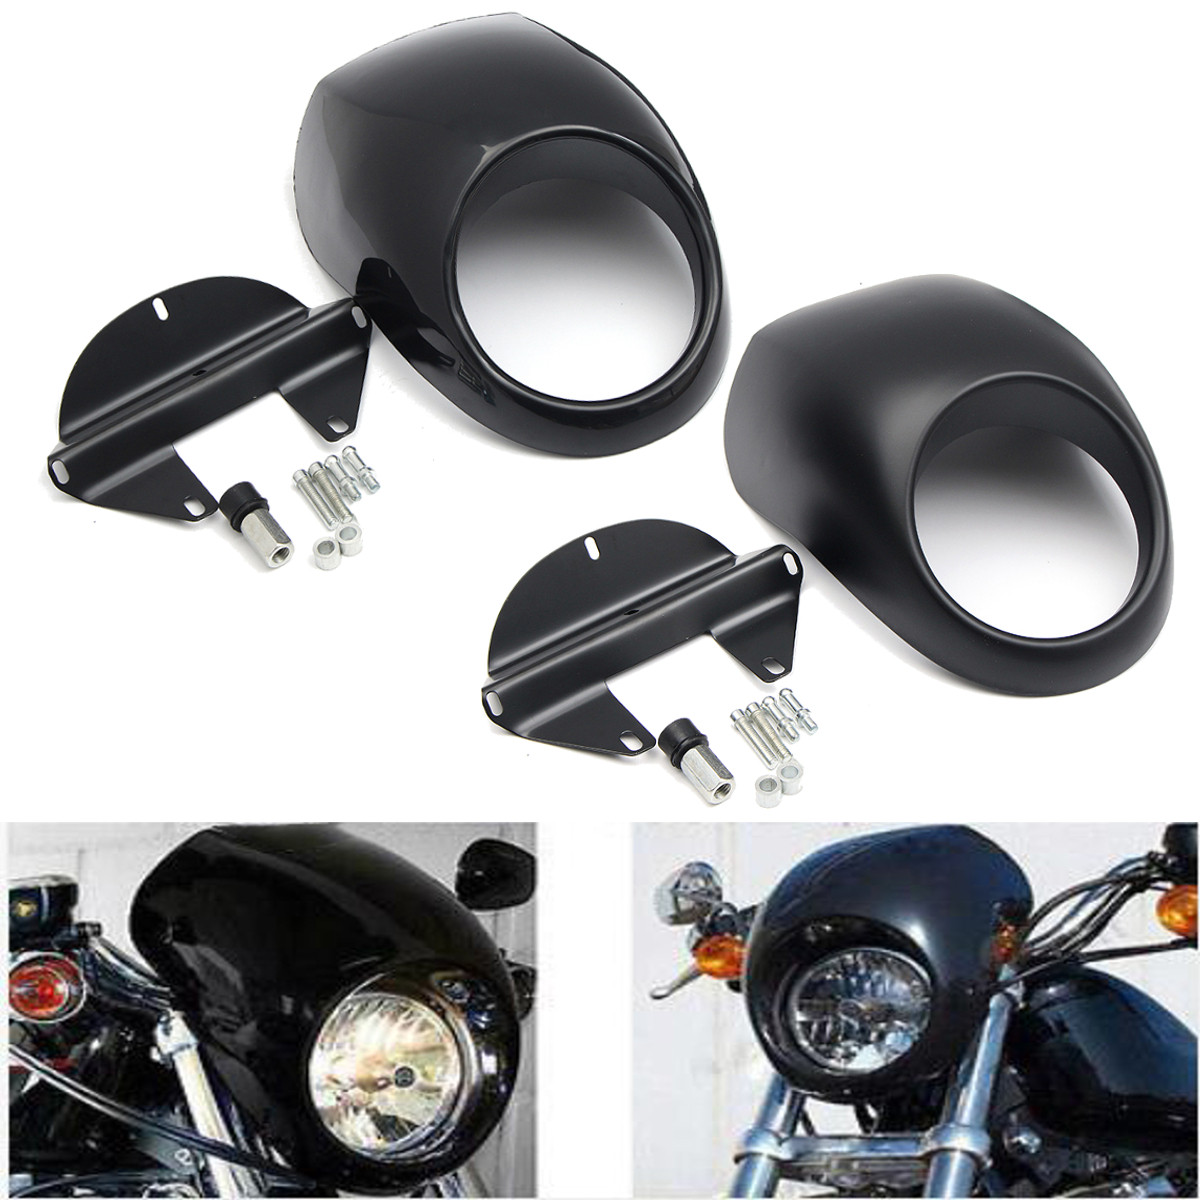 For Harley Sportster Dyna FX XL 883 1200 Motor Accessories Motorcycle Head light Mask Headlight Fairing Front Cowl Fork Mount